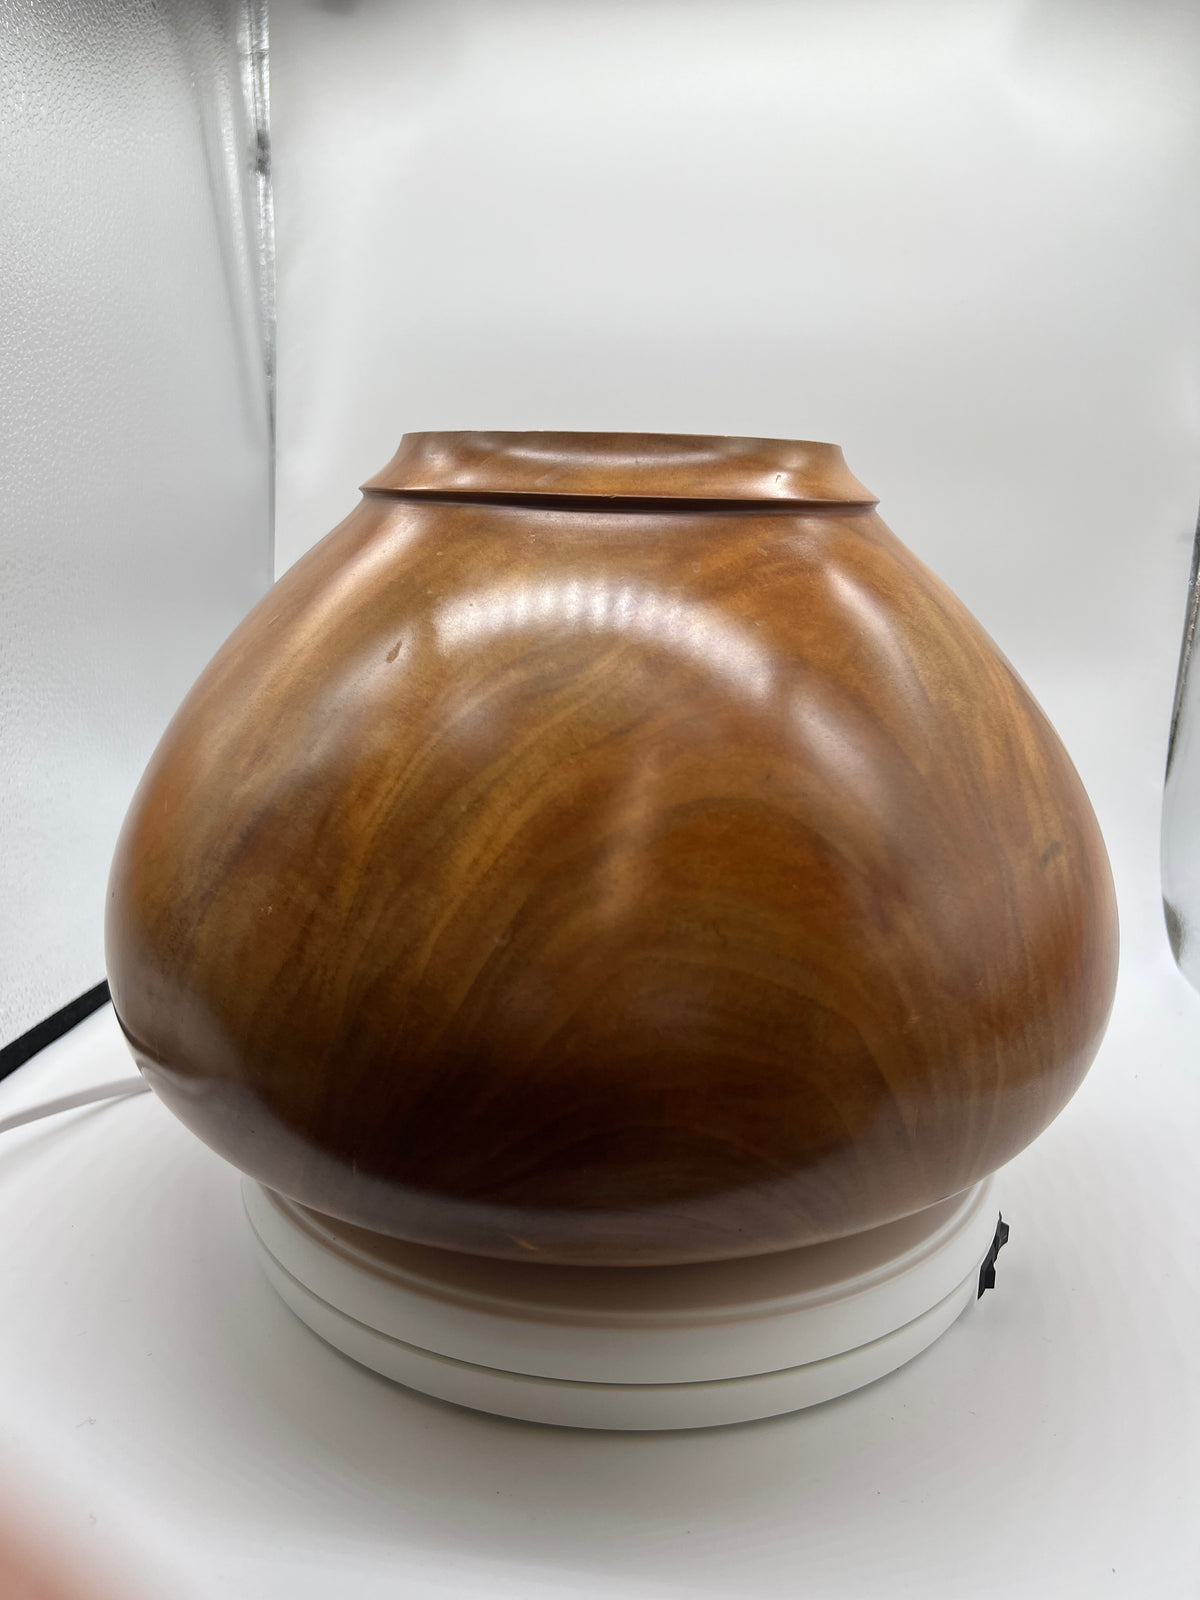 Lovely large wood turned bowl by mid-century wood artist Kevin Parks